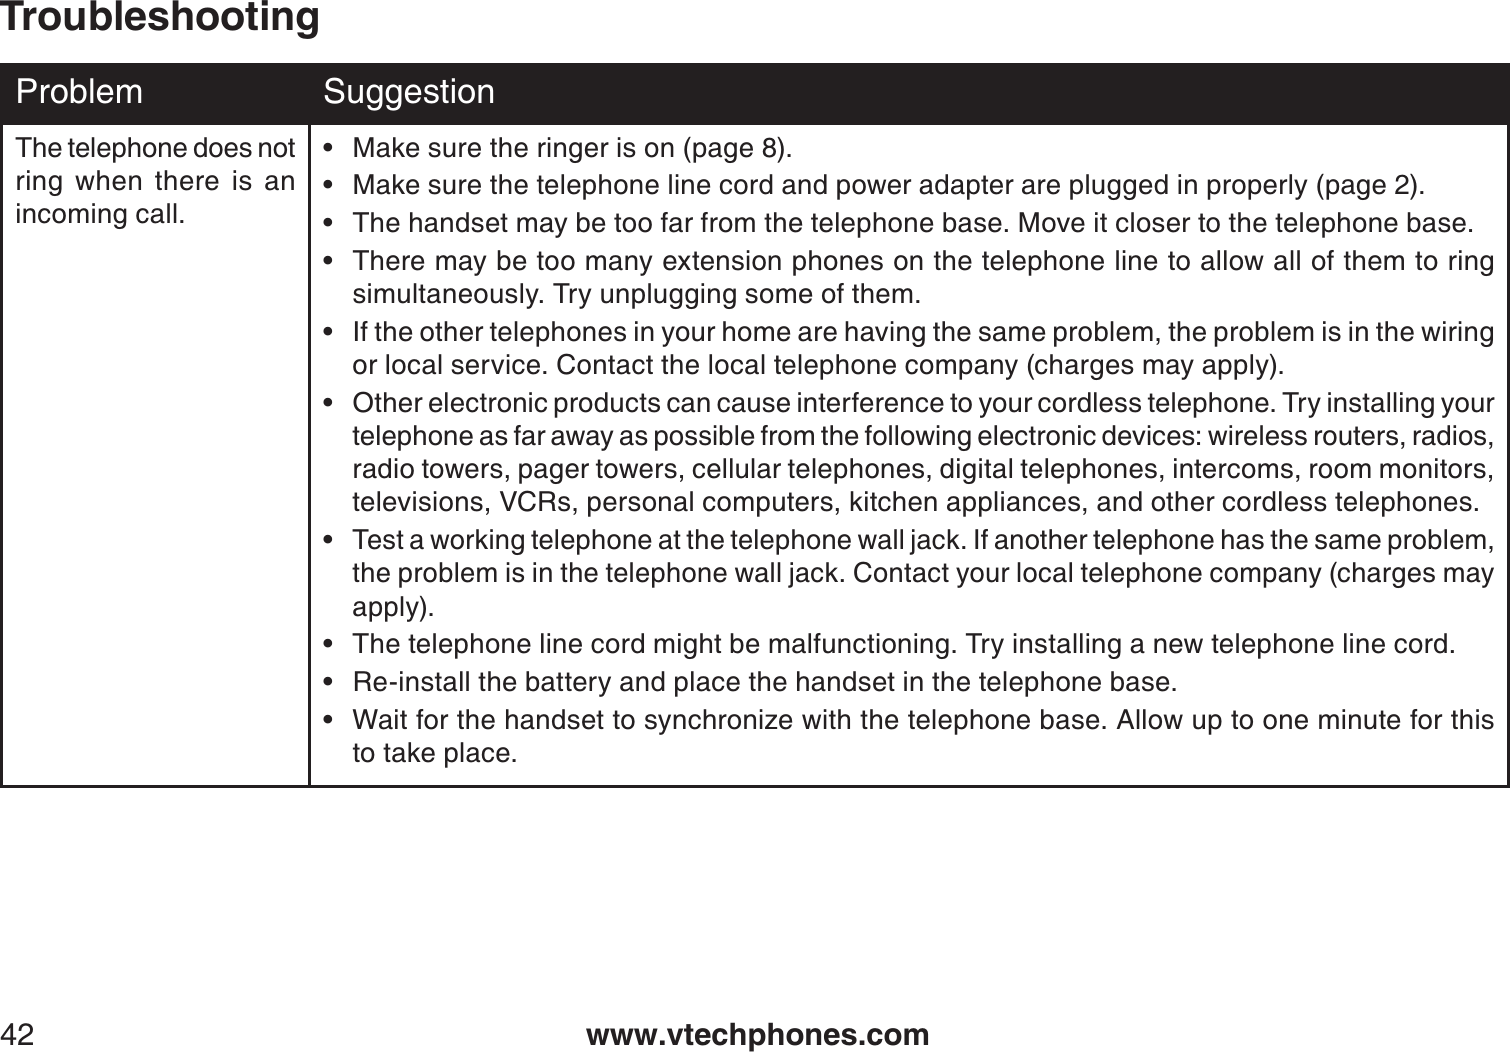 www.vtechphones.com42TroubleshootingProblem SuggestionThe telephone does not ring when there is an incoming call.Make sure the ringer is on (page 8).Make sure the telephone line cord and power adapter are plugged in properly (page 2).The handset may be too far from the telephone base. Move it closer to the telephone base.There may be too many extension phones on the telephone line to allow all of them to ring simultaneously. Try unplugging some of them.If the other telephones in your home are having the same problem, the problem is in the wiring or local service. Contact the local telephone company (charges may apply).Other electronic products can cause interference to your cordless telephone. Try installing your telephone as far away as possible from the following electronic devices: wireless routers, radios, radio towers, pager towers, cellular telephones, digital telephones, intercoms, room monitors, televisions, VCRs, personal computers, kitchen appliances, and other cordless telephones.Test a working telephone at the telephone wall jack. If another telephone has the same problem, the problem is in the telephone wall jack. Contact your local telephone company (charges may apply).The telephone line cord might be malfunctioning. Try installing a new telephone line cord.Re-install the battery and place the handset in the telephone base.Wait for the handset to synchronize with the telephone base. Allow up to one minute for thisto take place.••••••••••